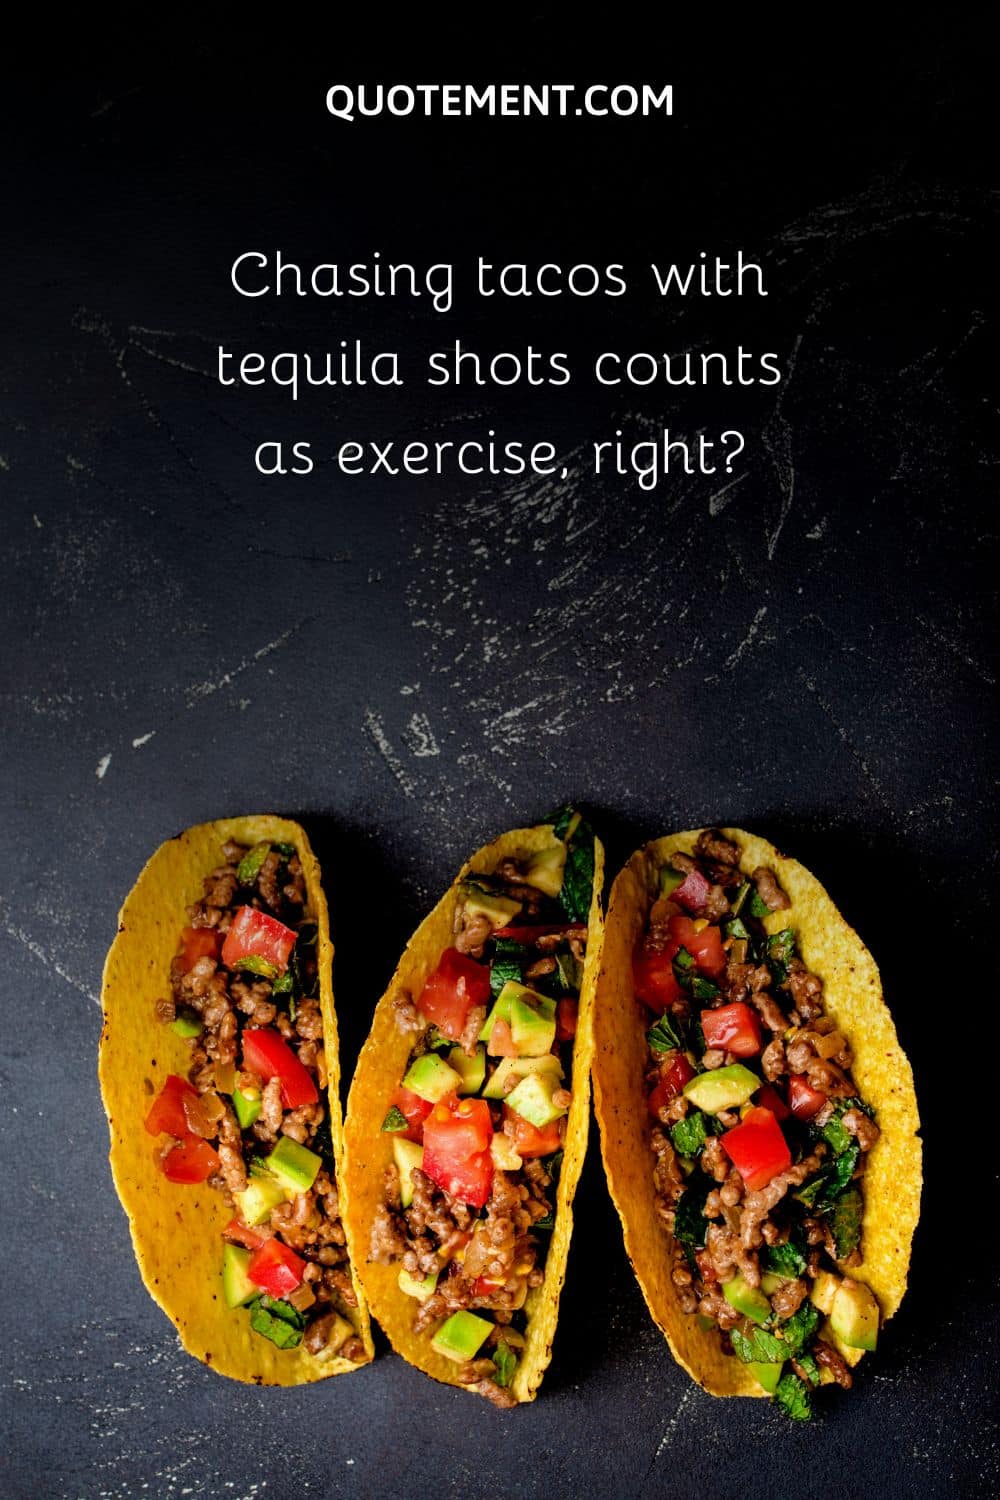 Chasing tacos with tequila shots counts as exercise, right